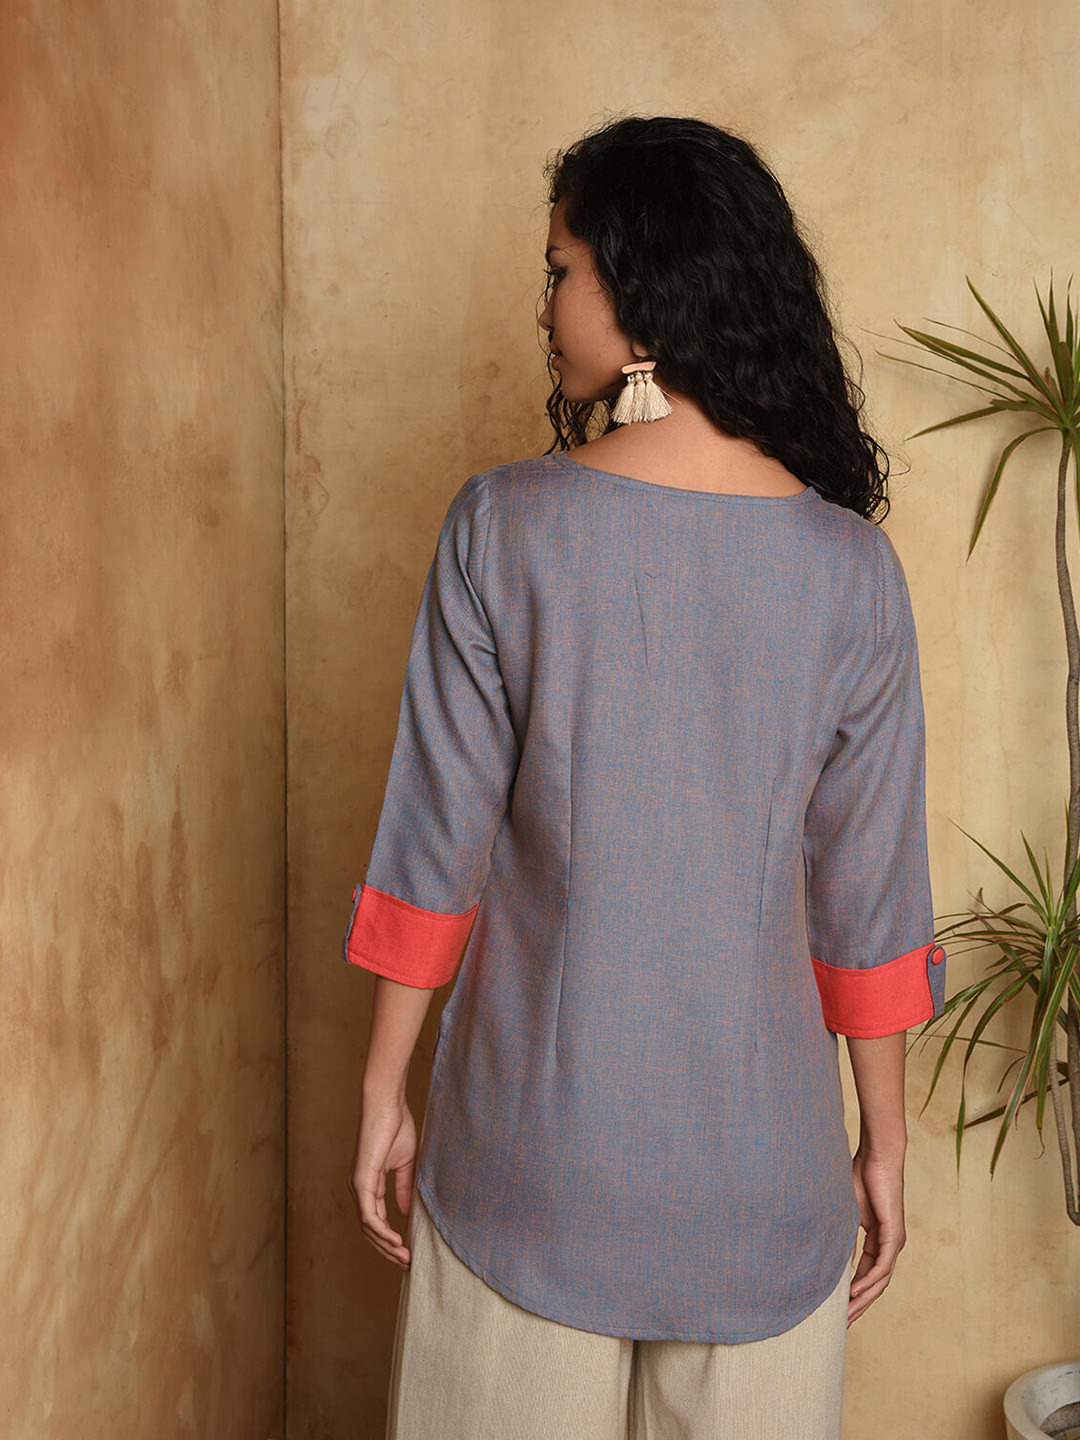 Contratting cuff and Button detail Cotton top